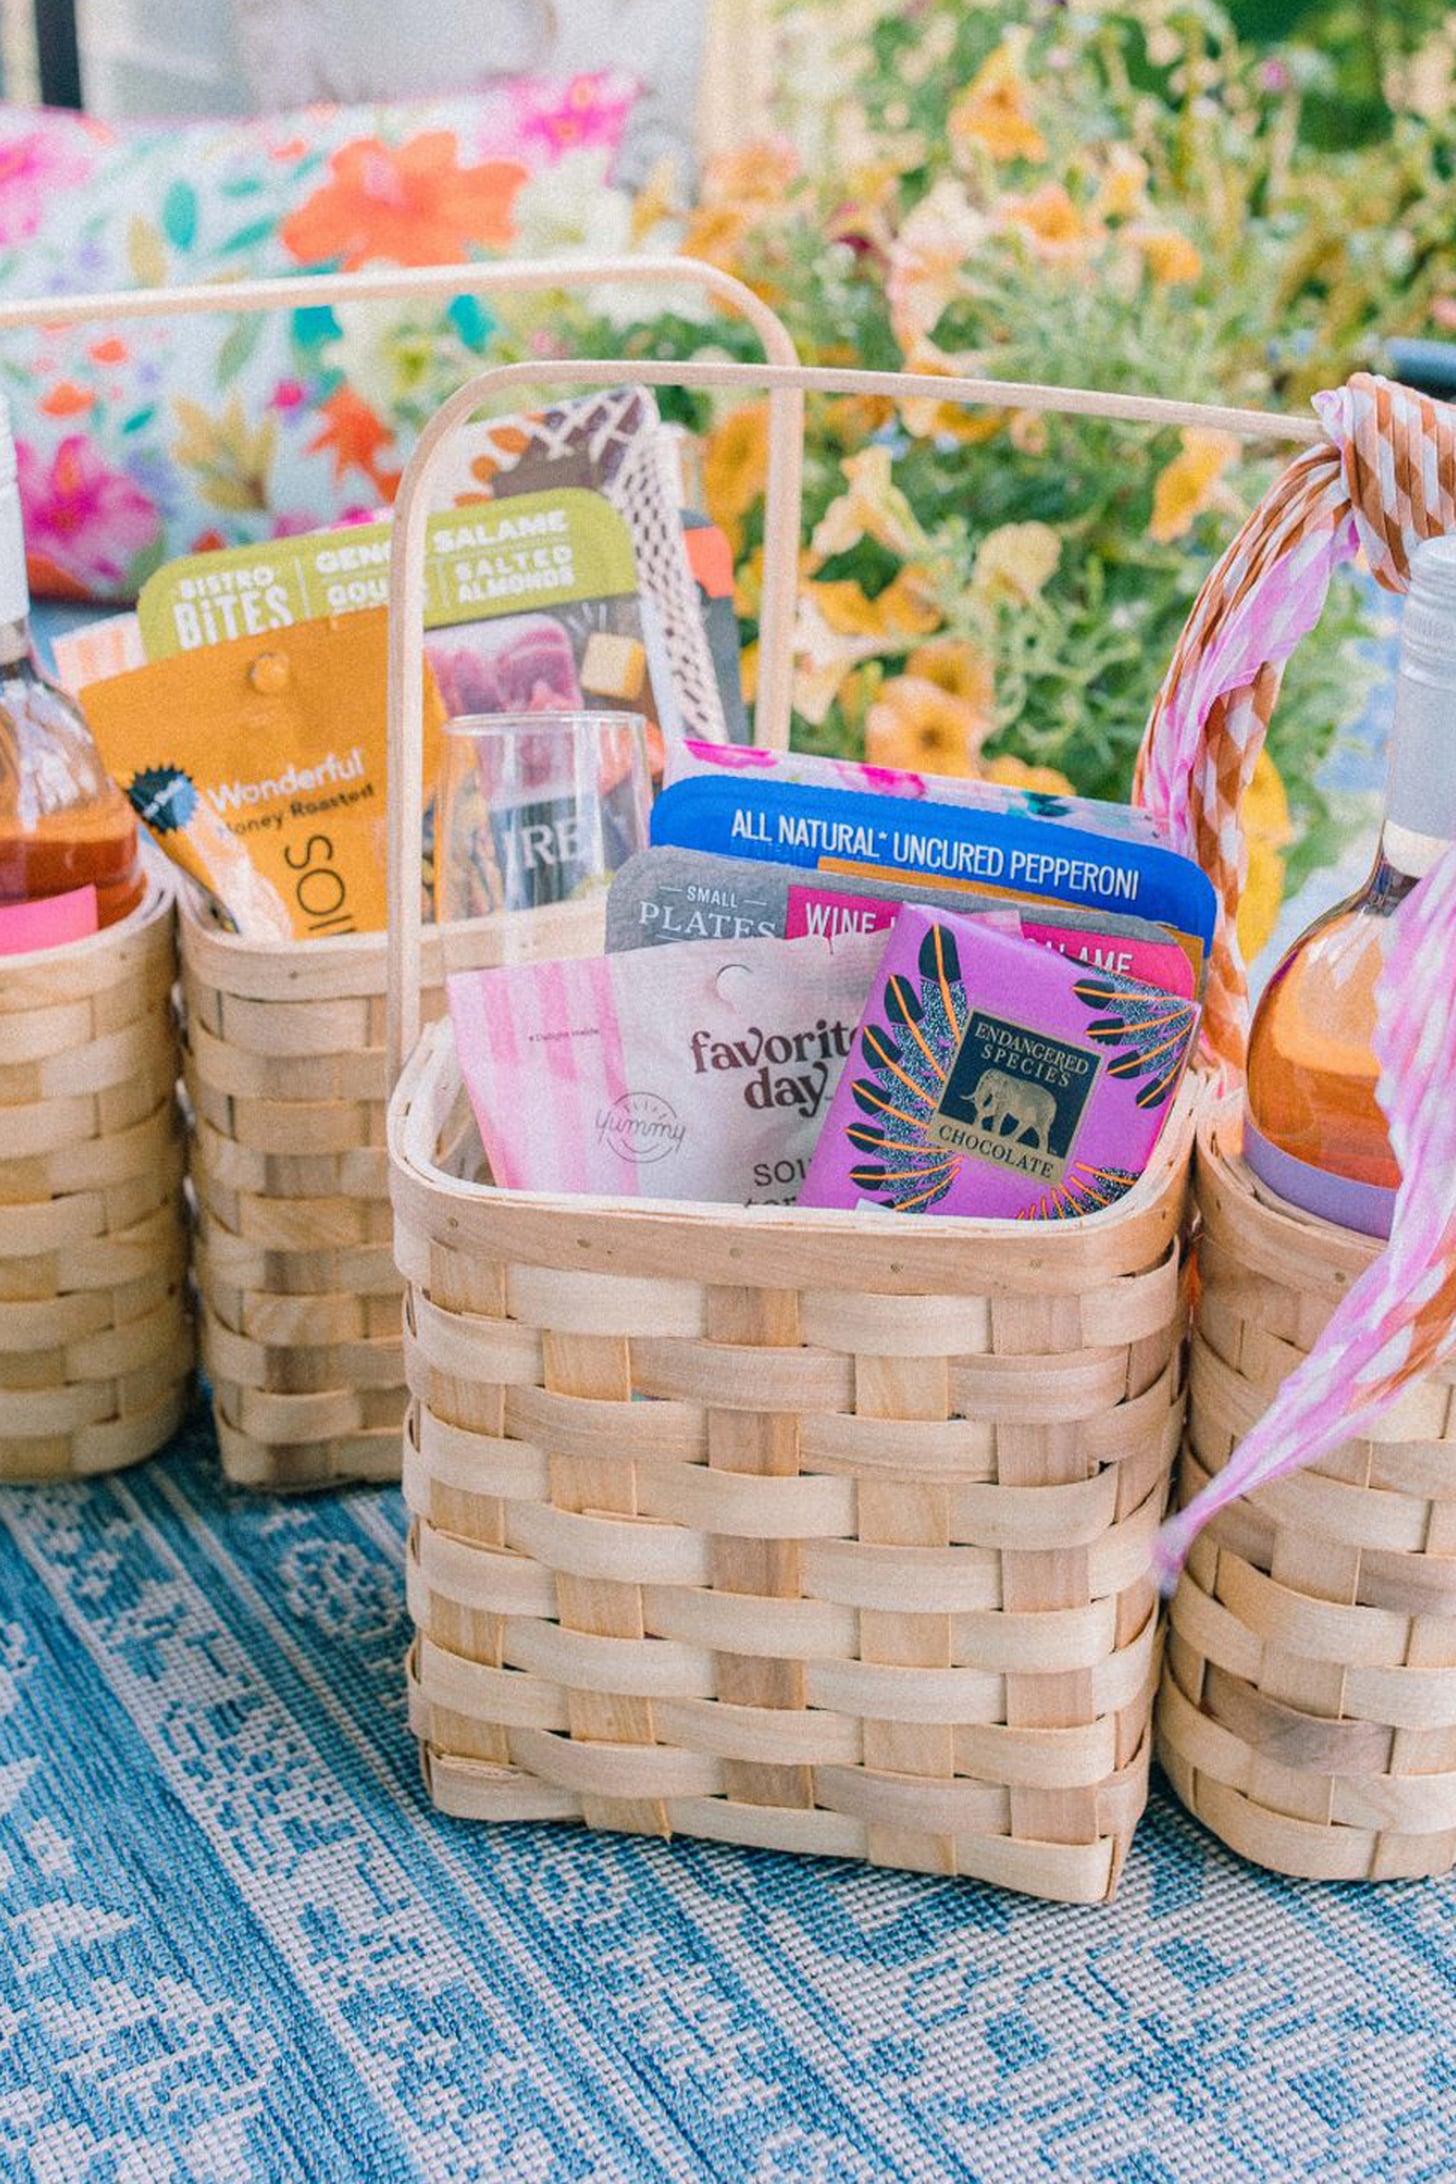 Pack Your Picnic Basket Like a Pro: Essential Gadgets for Your